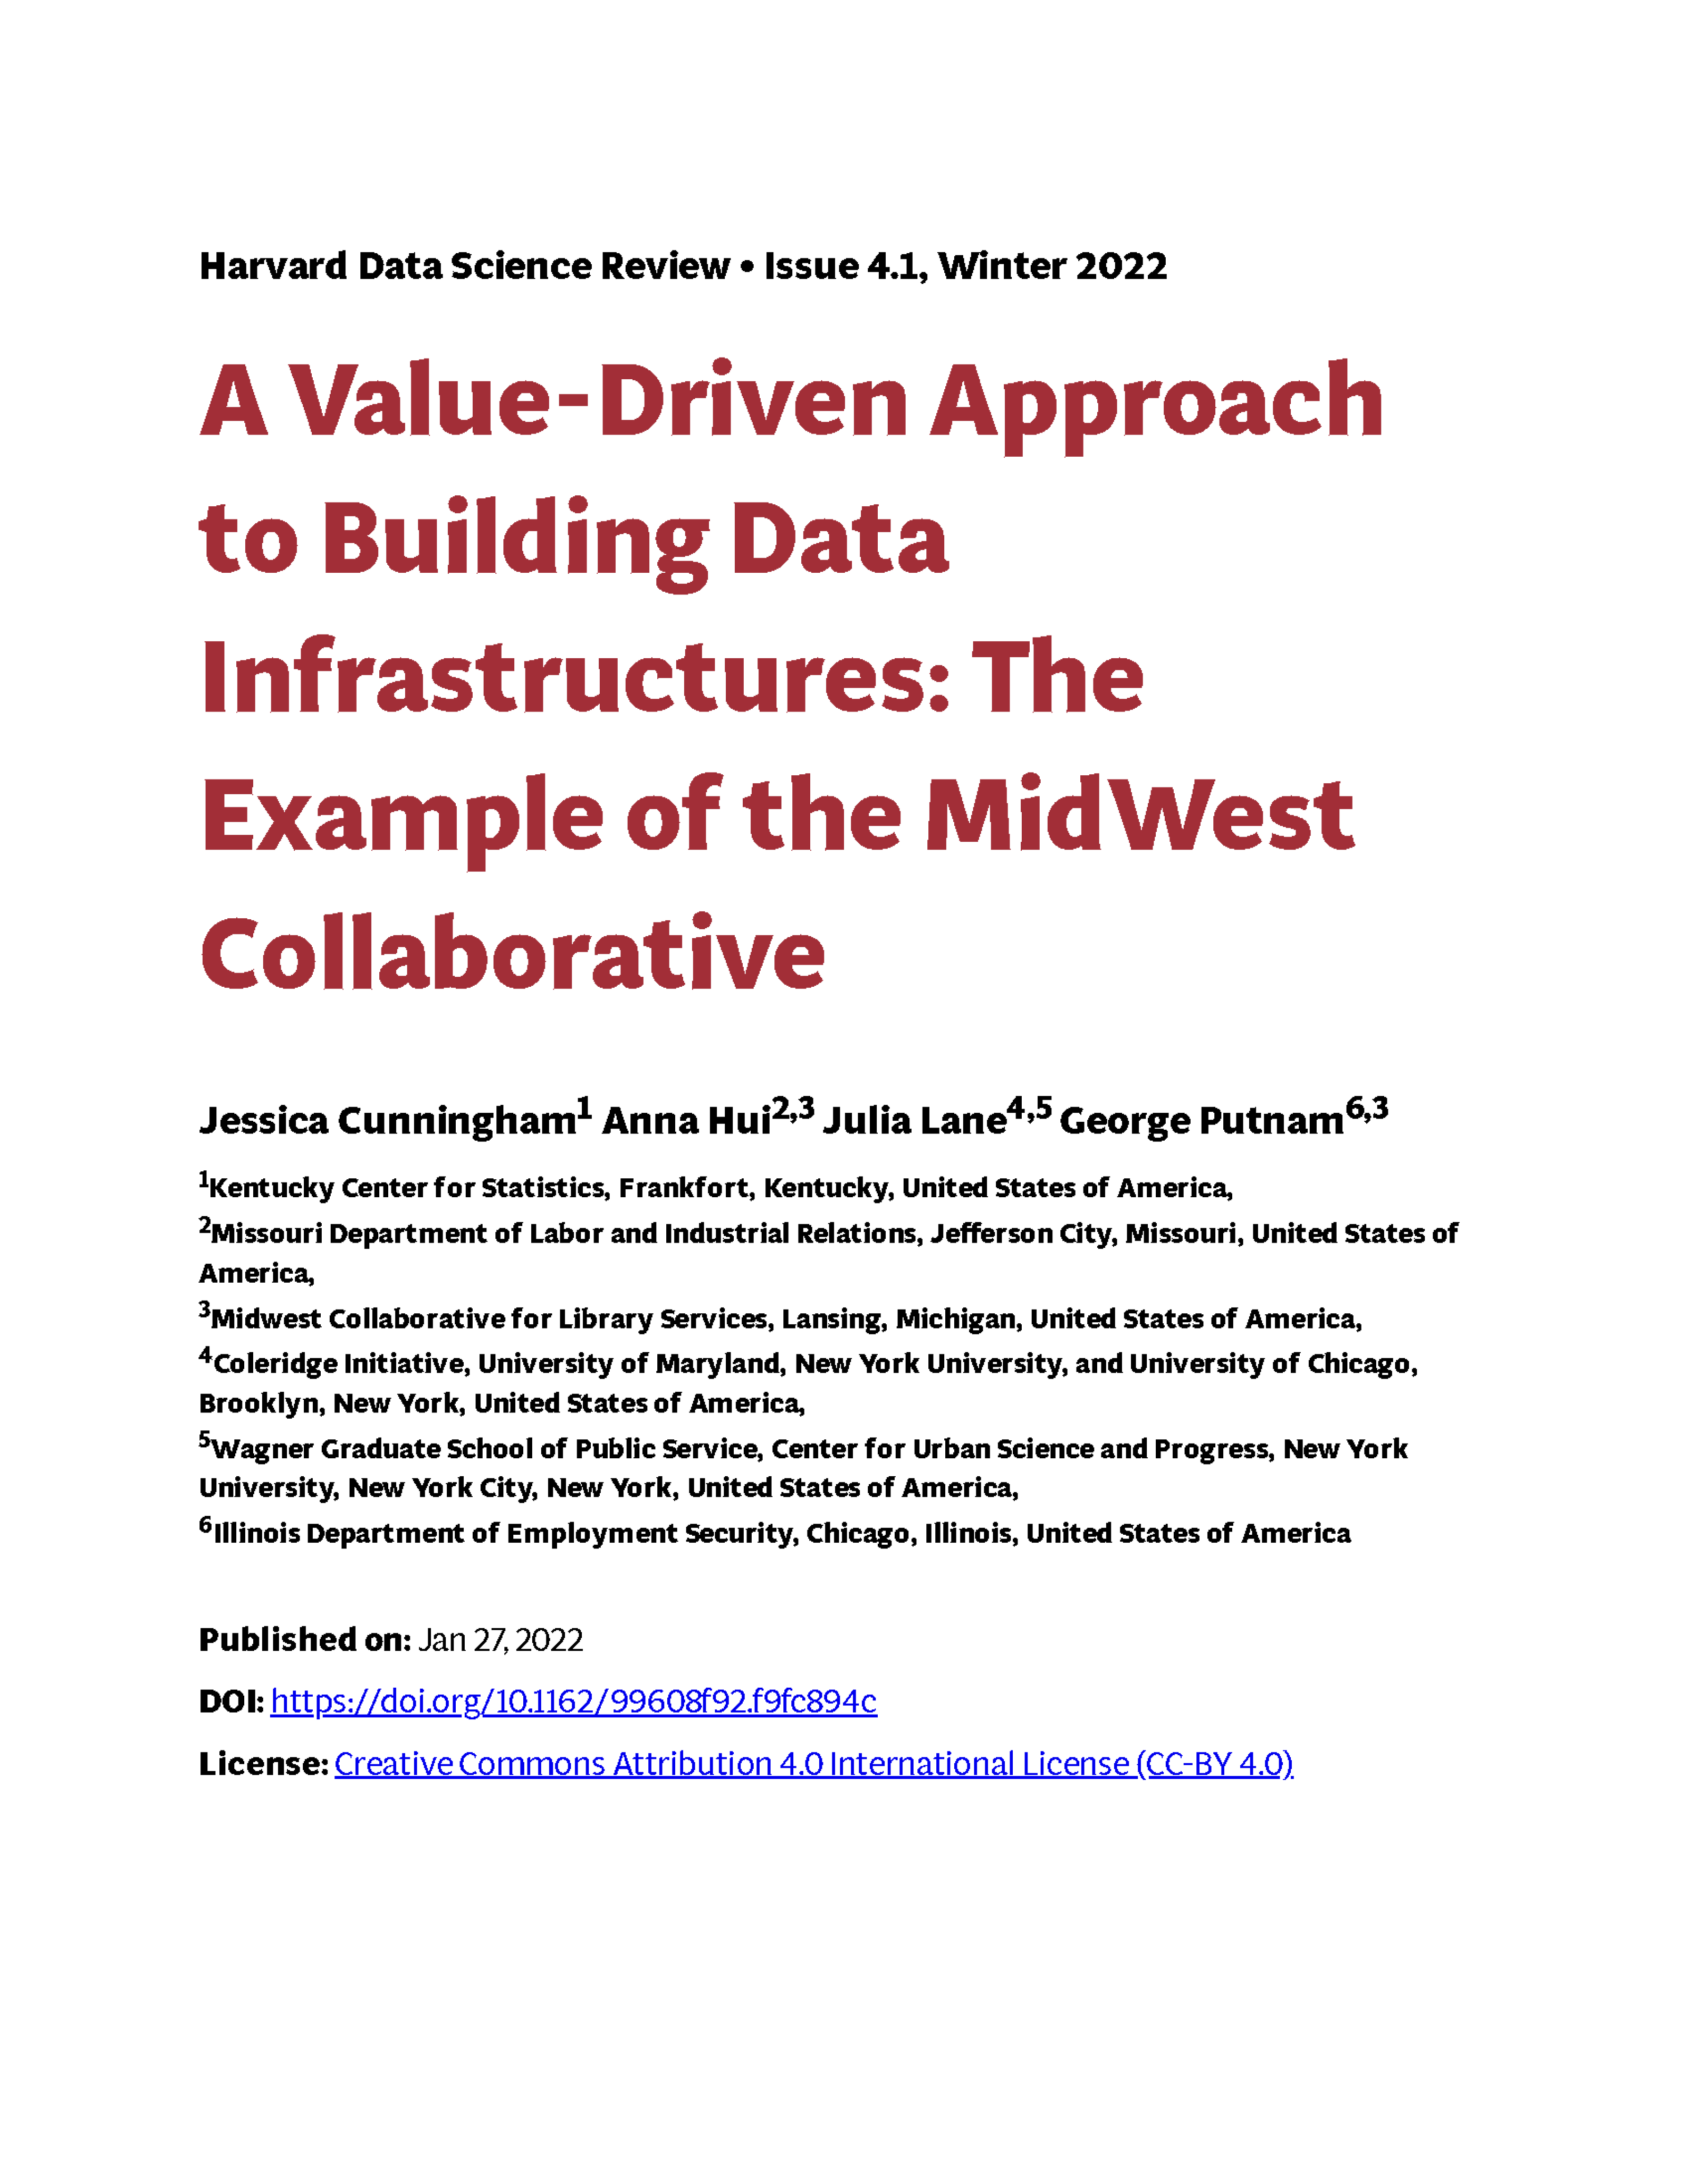 A Value-Driven Approach to Building Data Infrastructures: The Example of the MidWest Collaborative